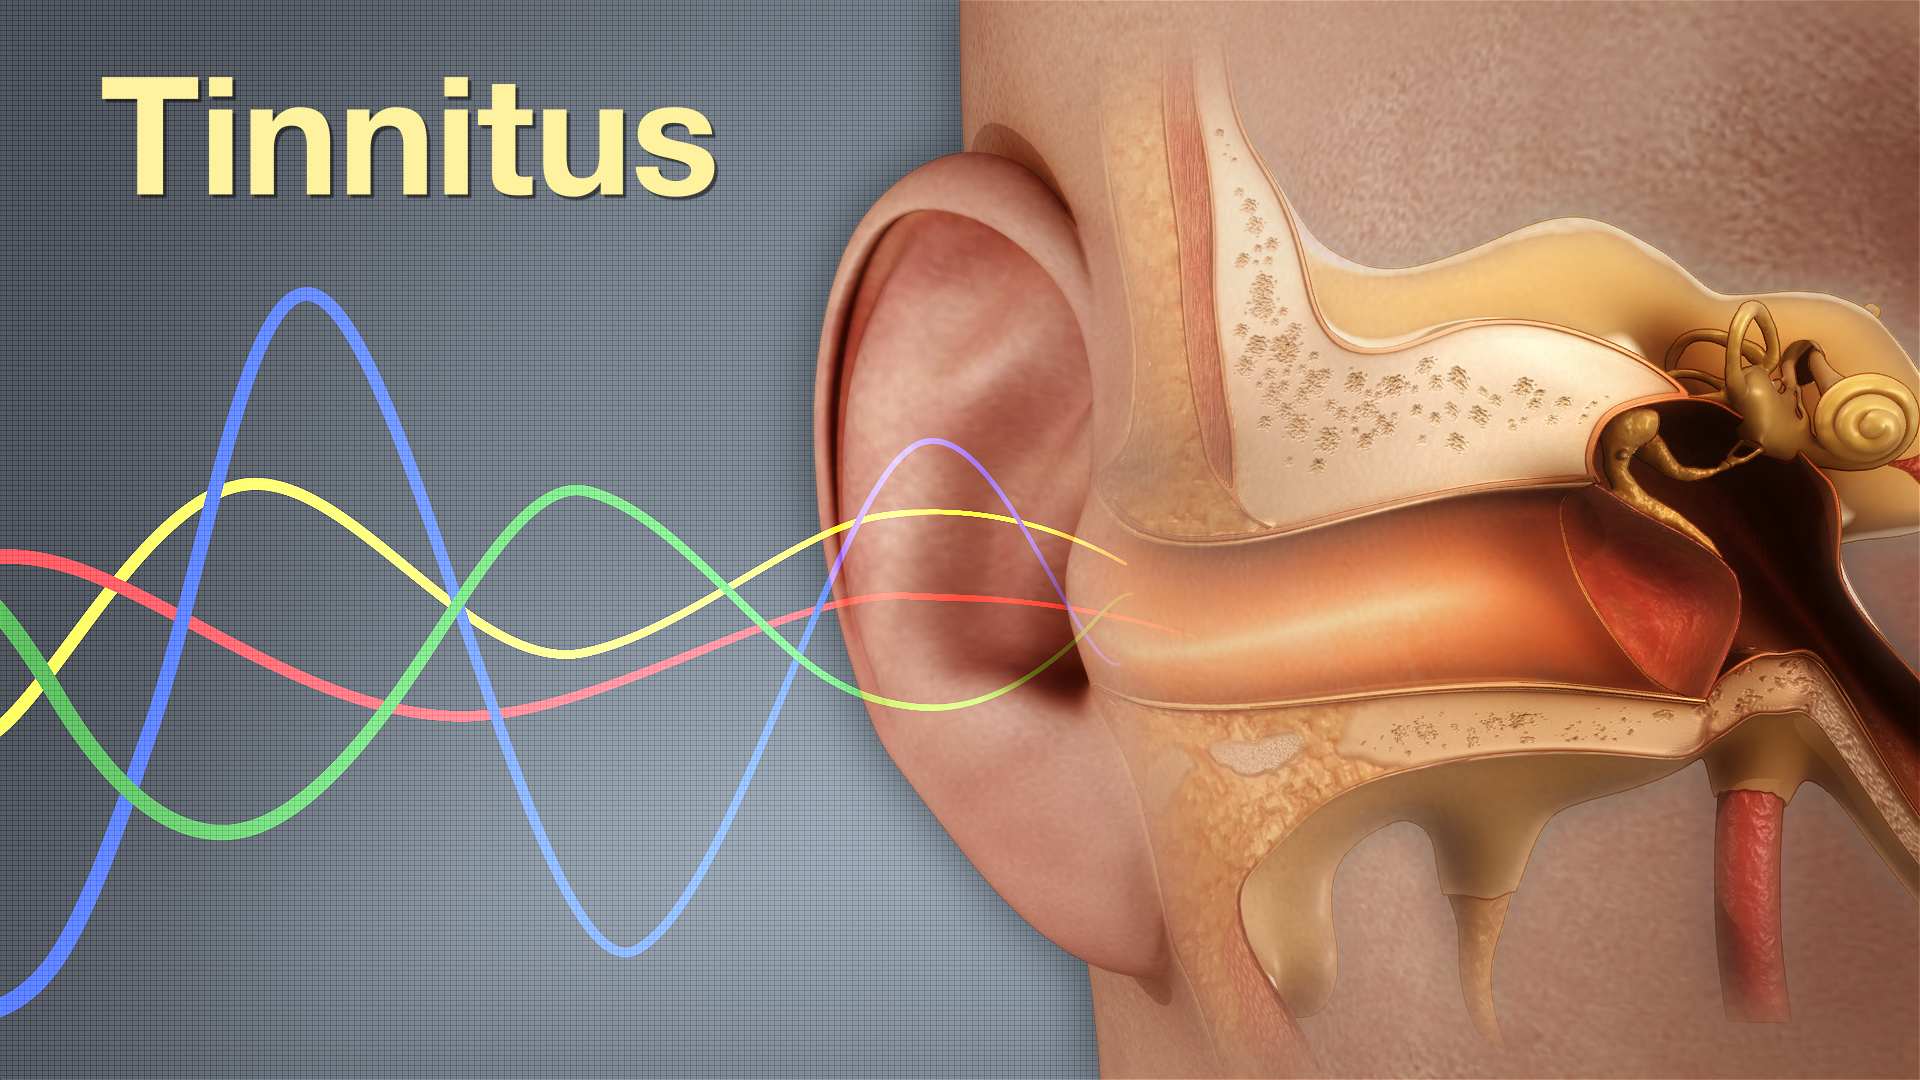 goedkeuren Wie Staat Tinnitus shown and explained using medical animation still shot